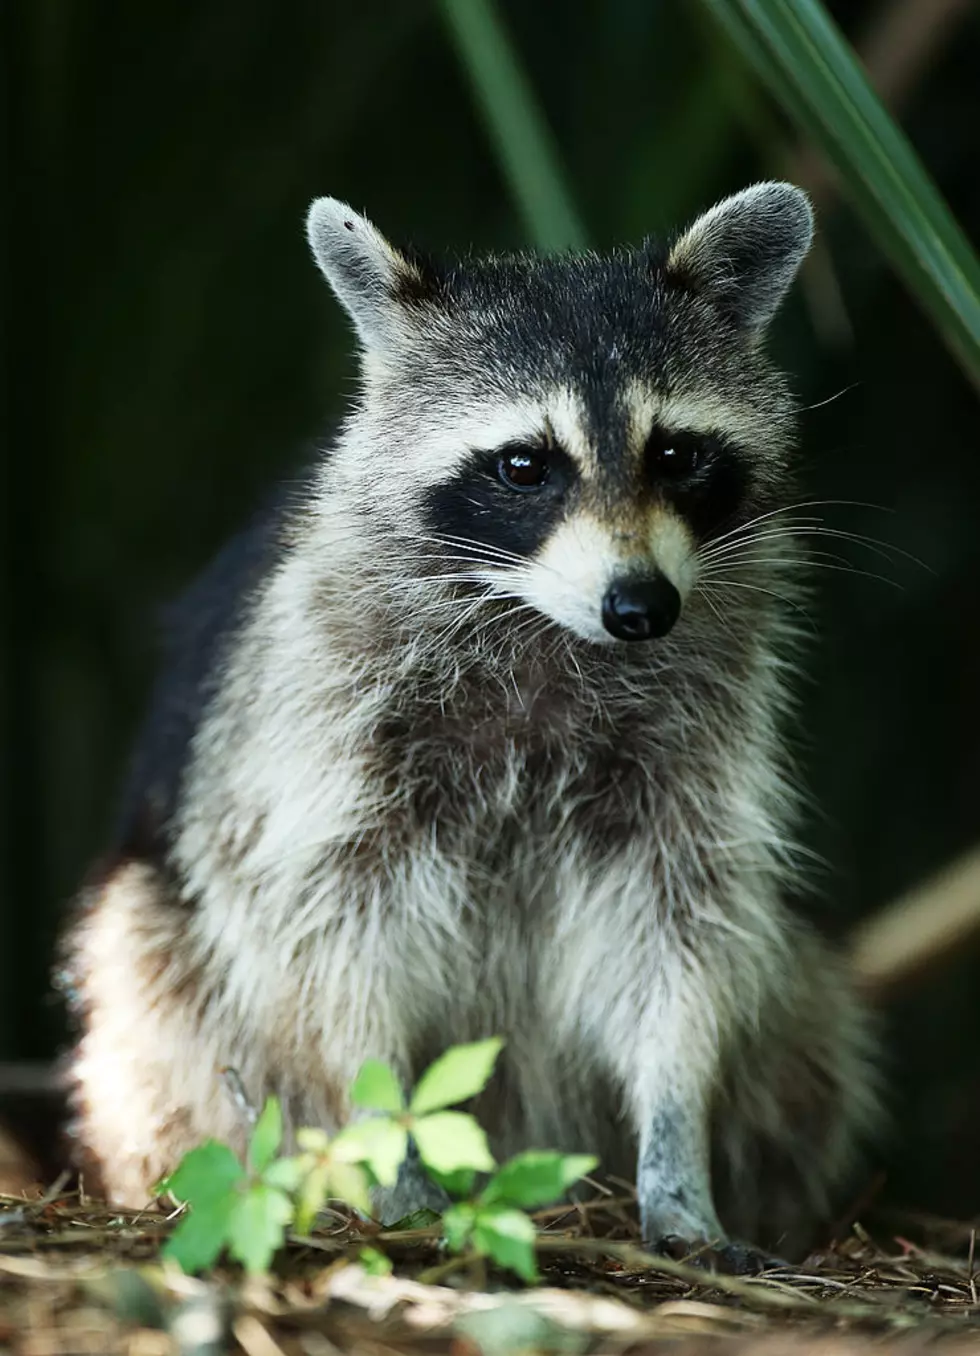 Family Litter of Adorable Baby Raccoon Kits Saved in New Hampshire